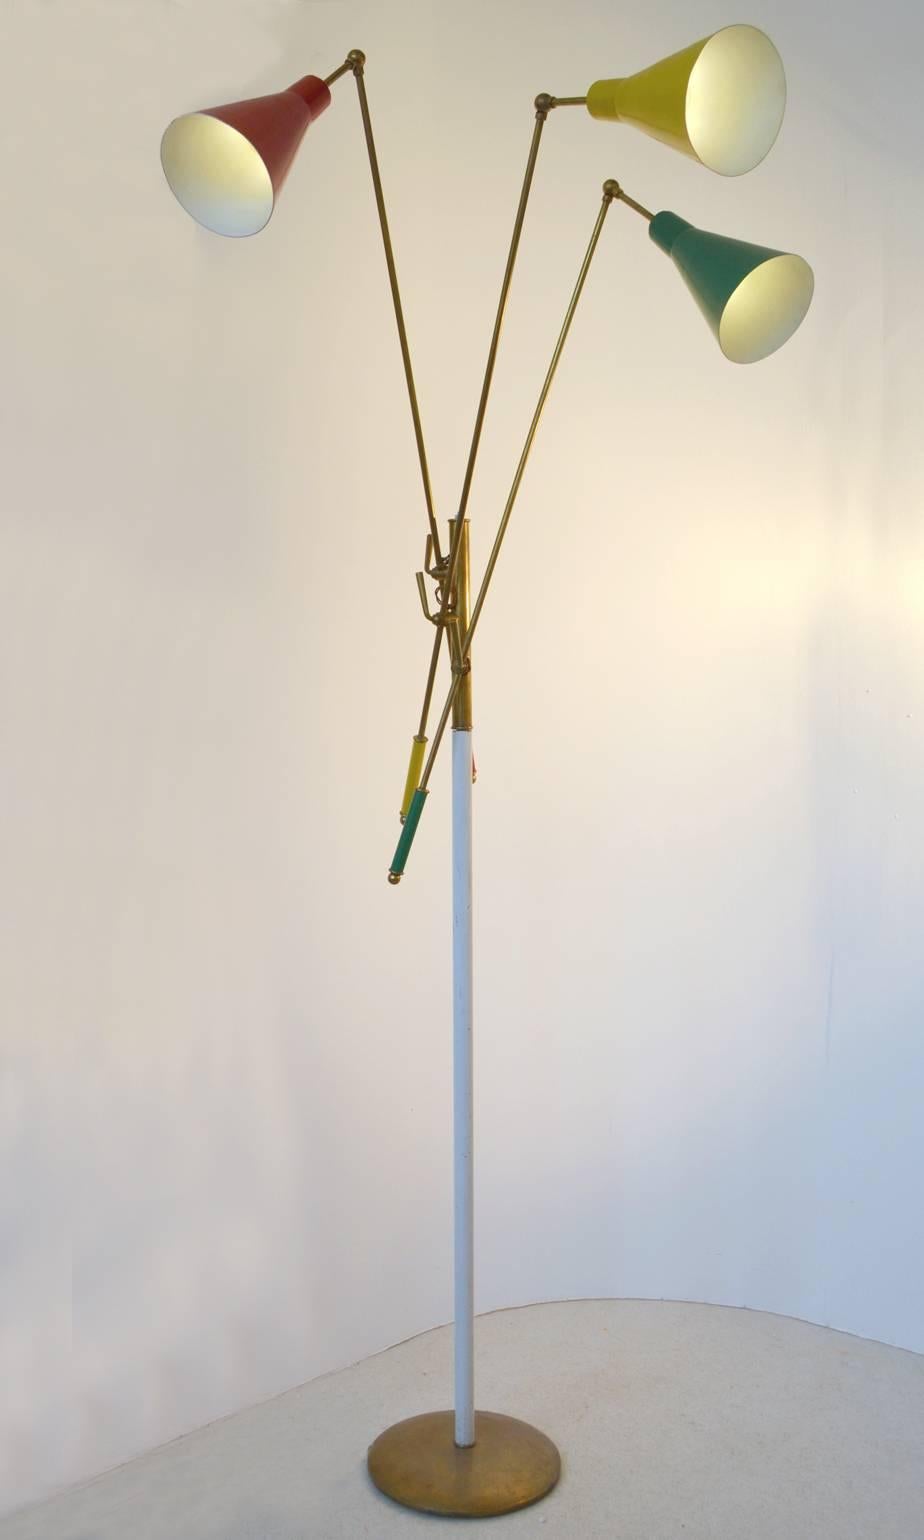 Tall multi colored Italian 1950s floor lamp in the style of Arredoluce with three articulating arms with shades and counterweights in enamel red, yellow and green attached to a main central stem in brass and cream enamel on a brass base. Each arm